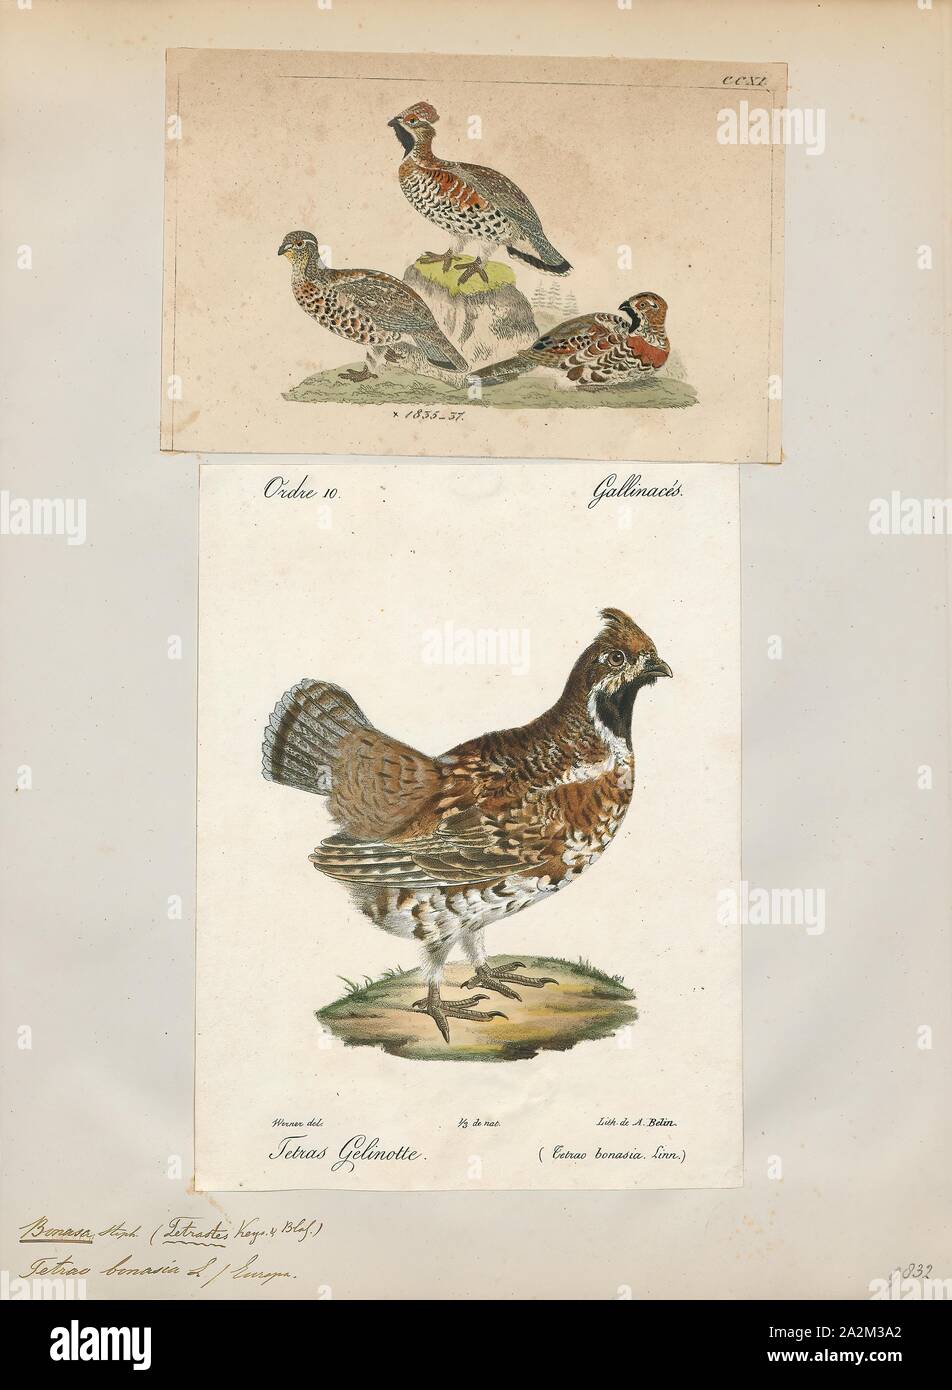 Bonasa betulina, Print, Ruffed grouse, The ruffed grouse (Bonasa umbellus) is a medium-sized grouse occurring in forests from the Appalachian Mountains across Canada to Alaska. It is non-migratory. It is the only species in the genus Bonasa., 1700-1880 Stock Photo